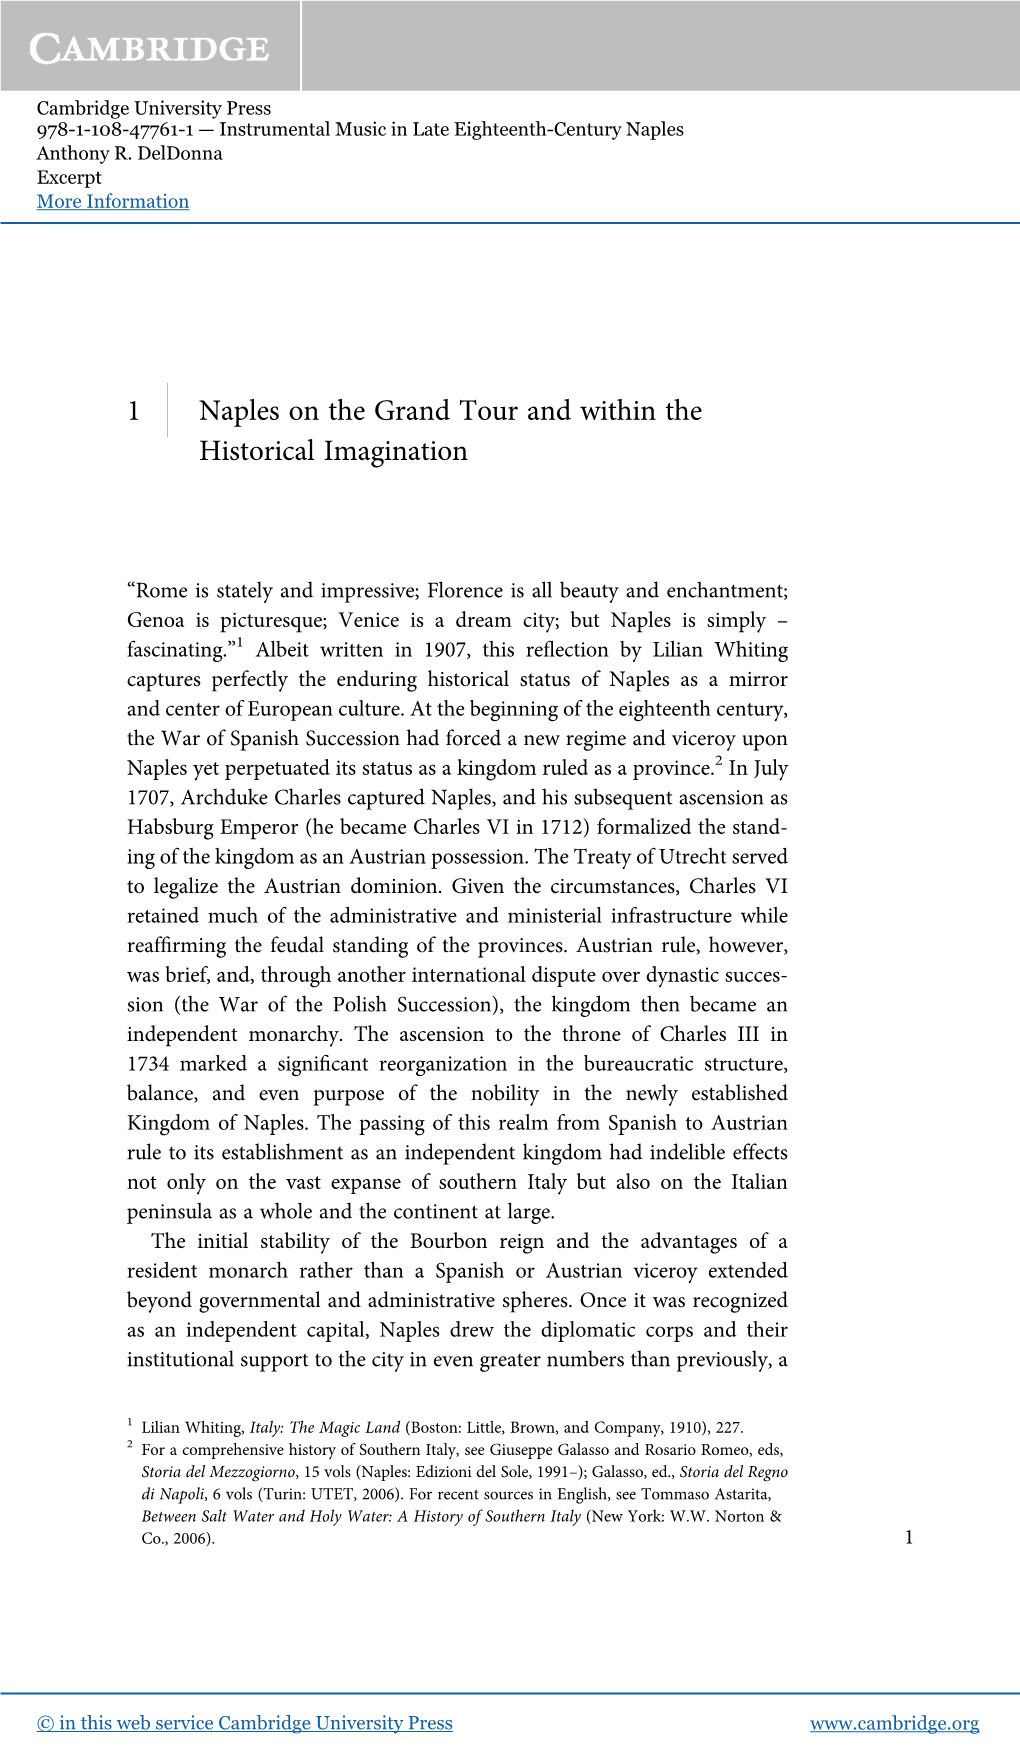 1 Naples on the Grand Tour and Within the Historical Imagination